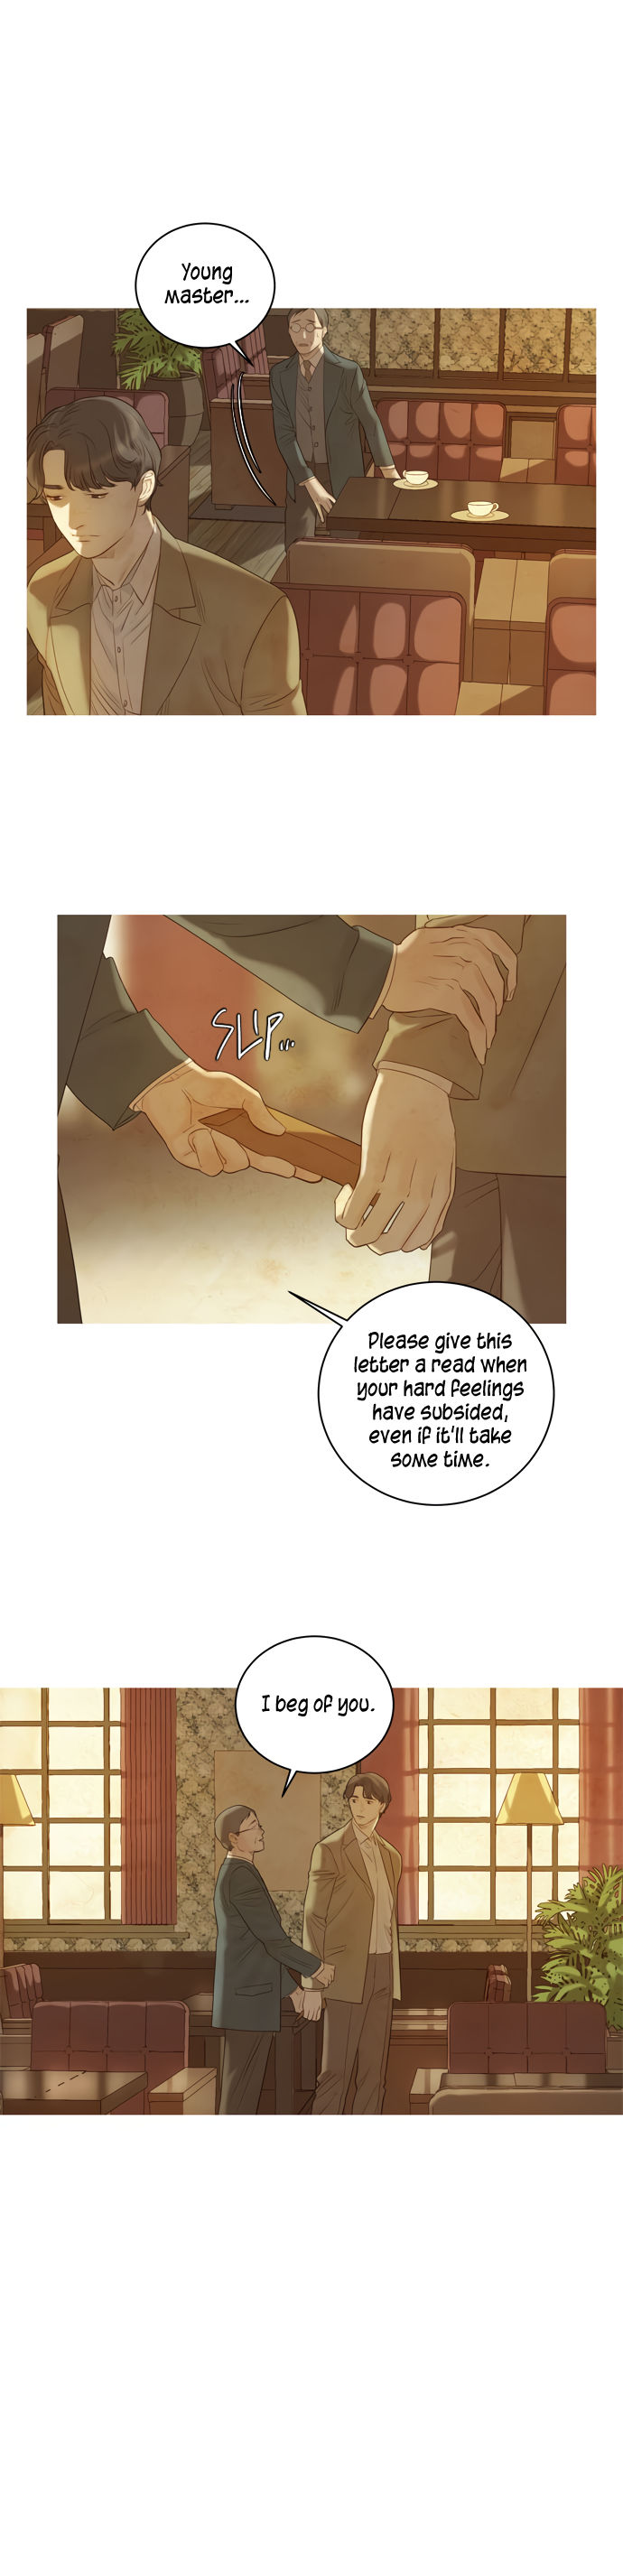 Gorae Byul - The Gyeongseong Mermaid - Chapter 17 Page 9